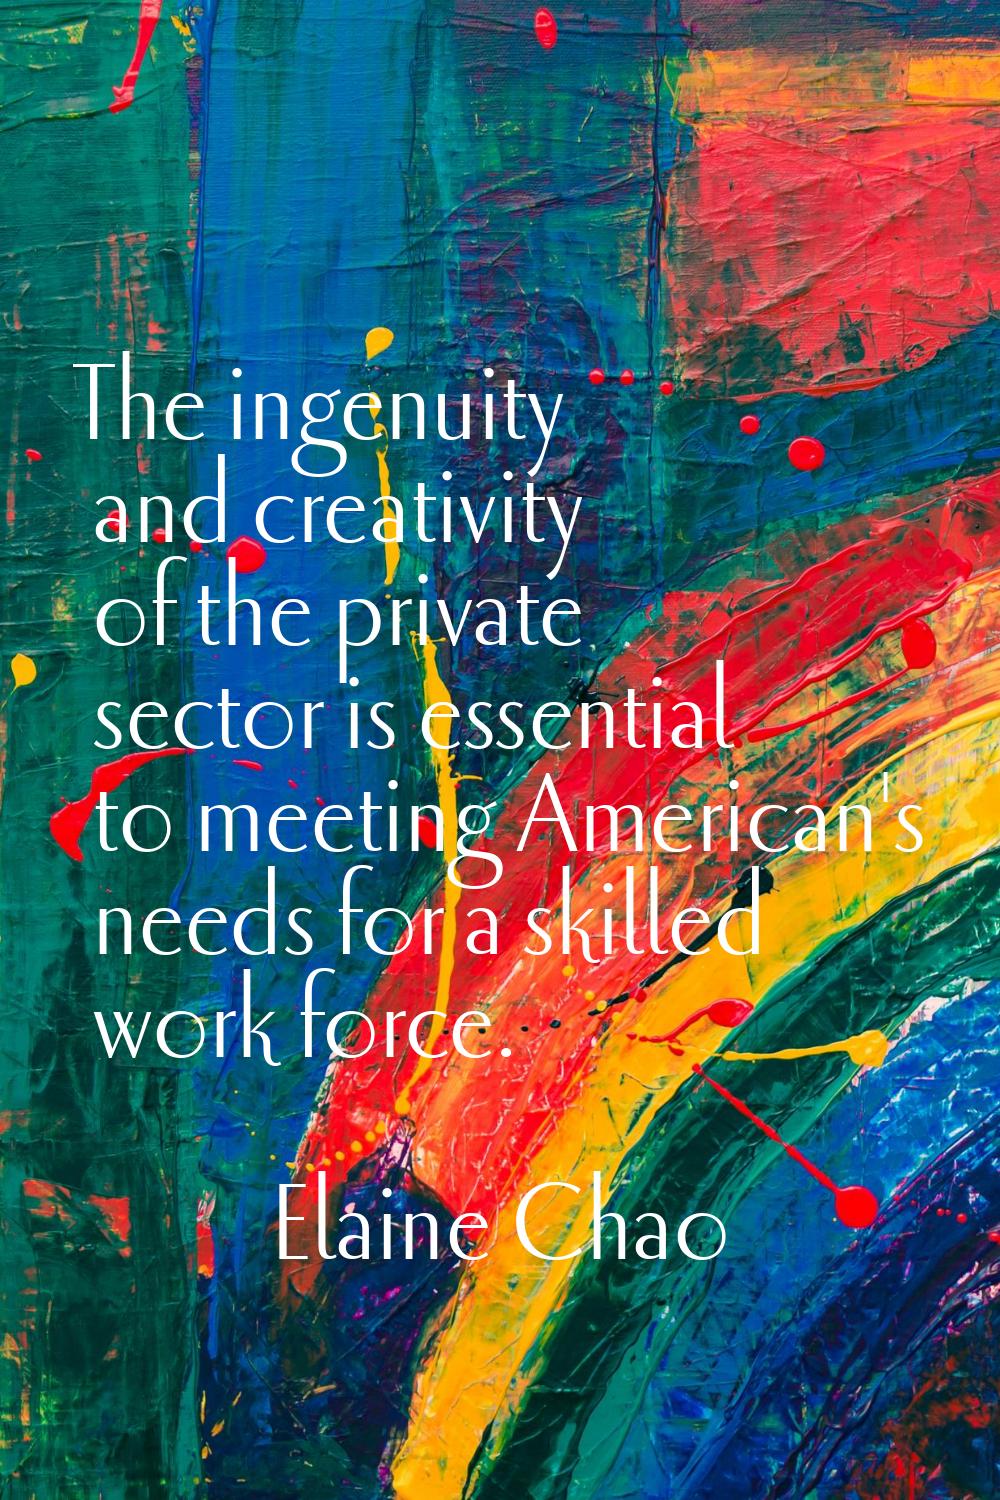 The ingenuity and creativity of the private sector is essential to meeting American's needs for a s